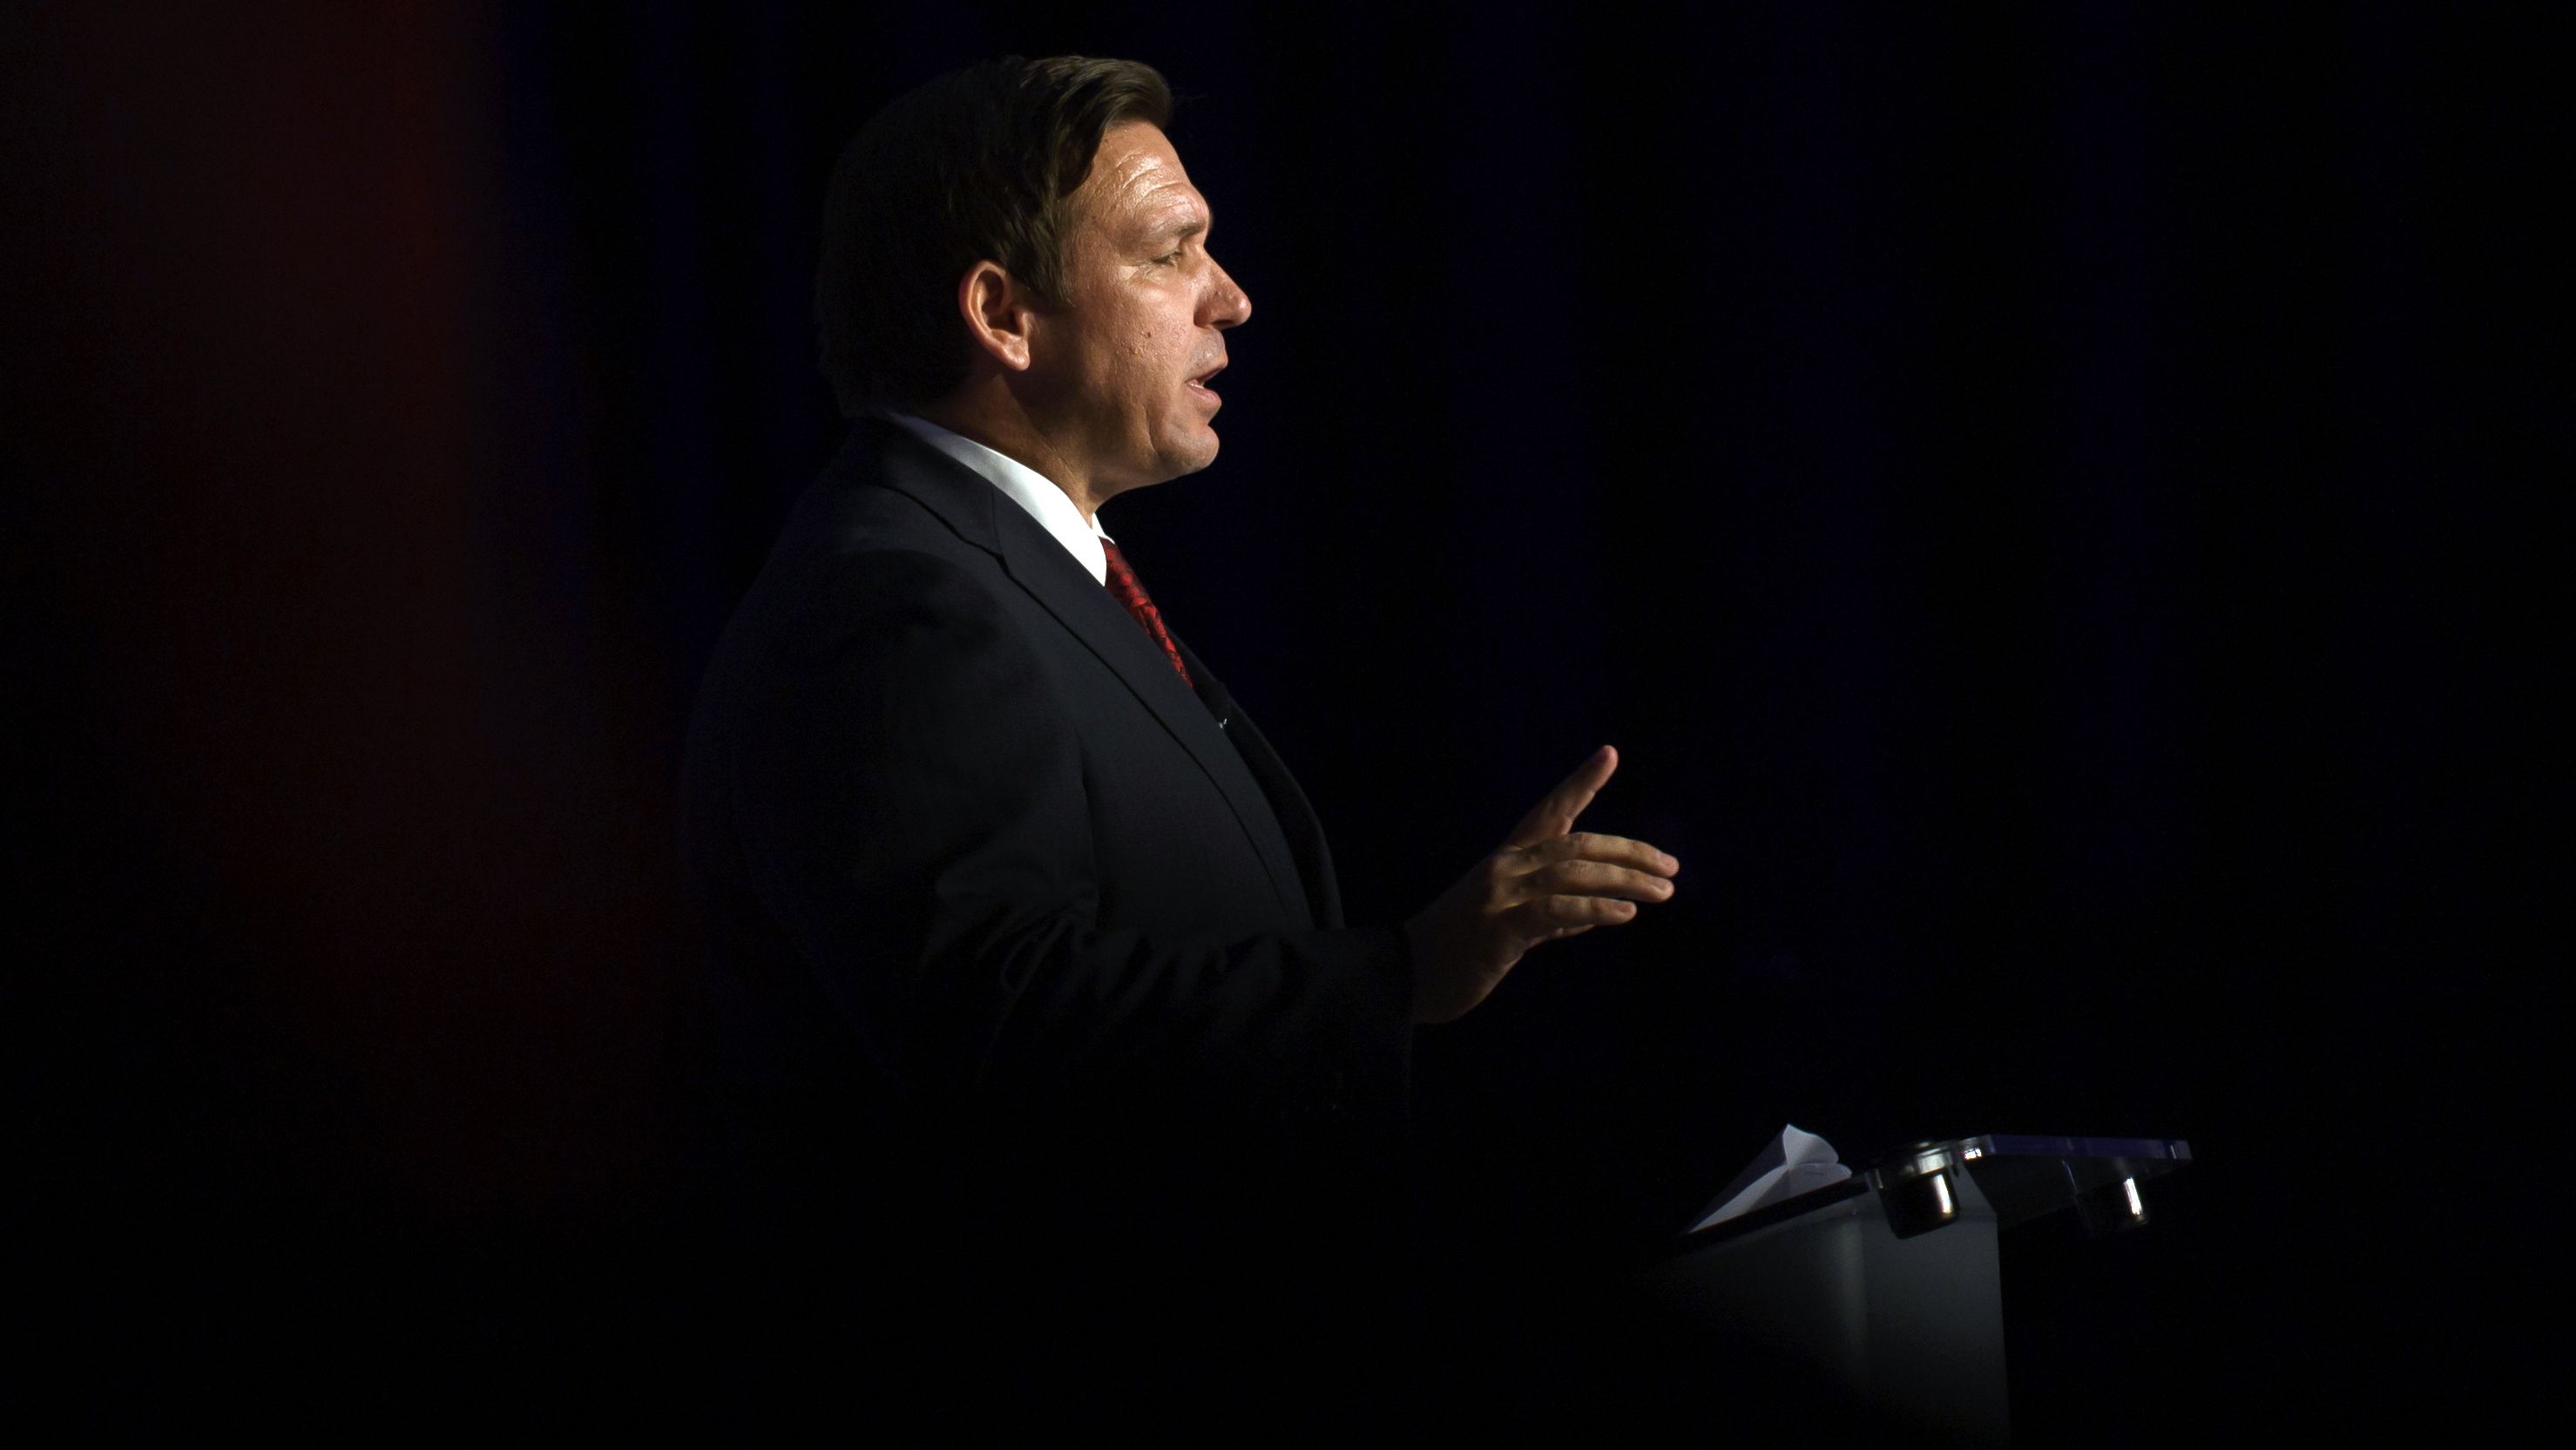 Florida Gov. Ron DeSantis speaks at a rally in Pittsburgh in support of Pennsylvania GOP gubernatorial candidate Doug Mastriano on August 19, 2022.